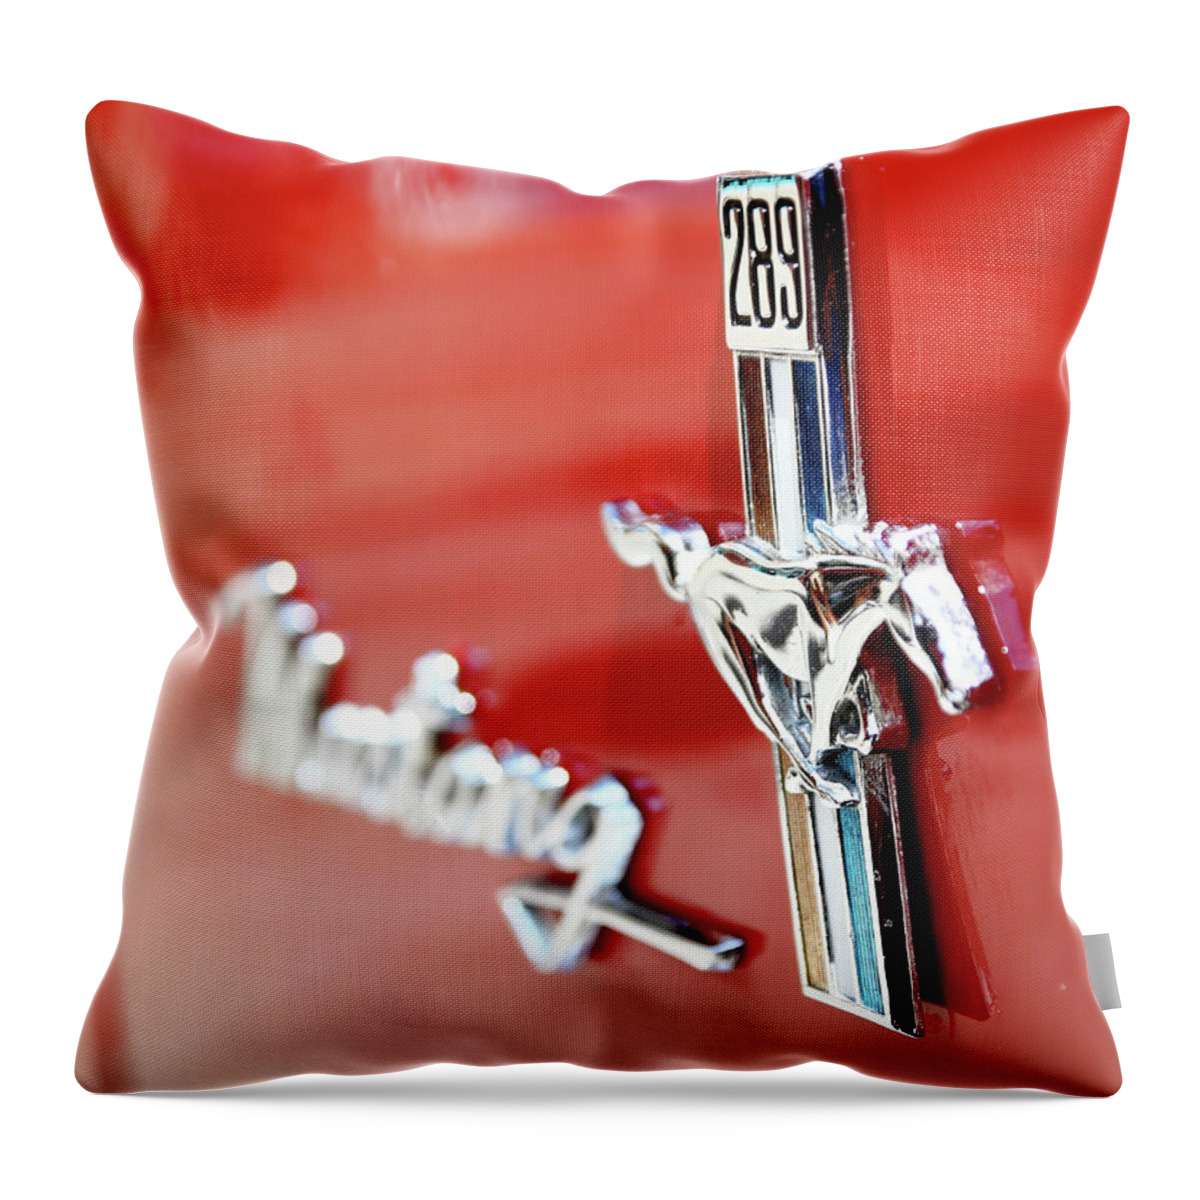 Mustang Throw Pillow featuring the photograph 289 by Lens Art Photography By Larry Trager